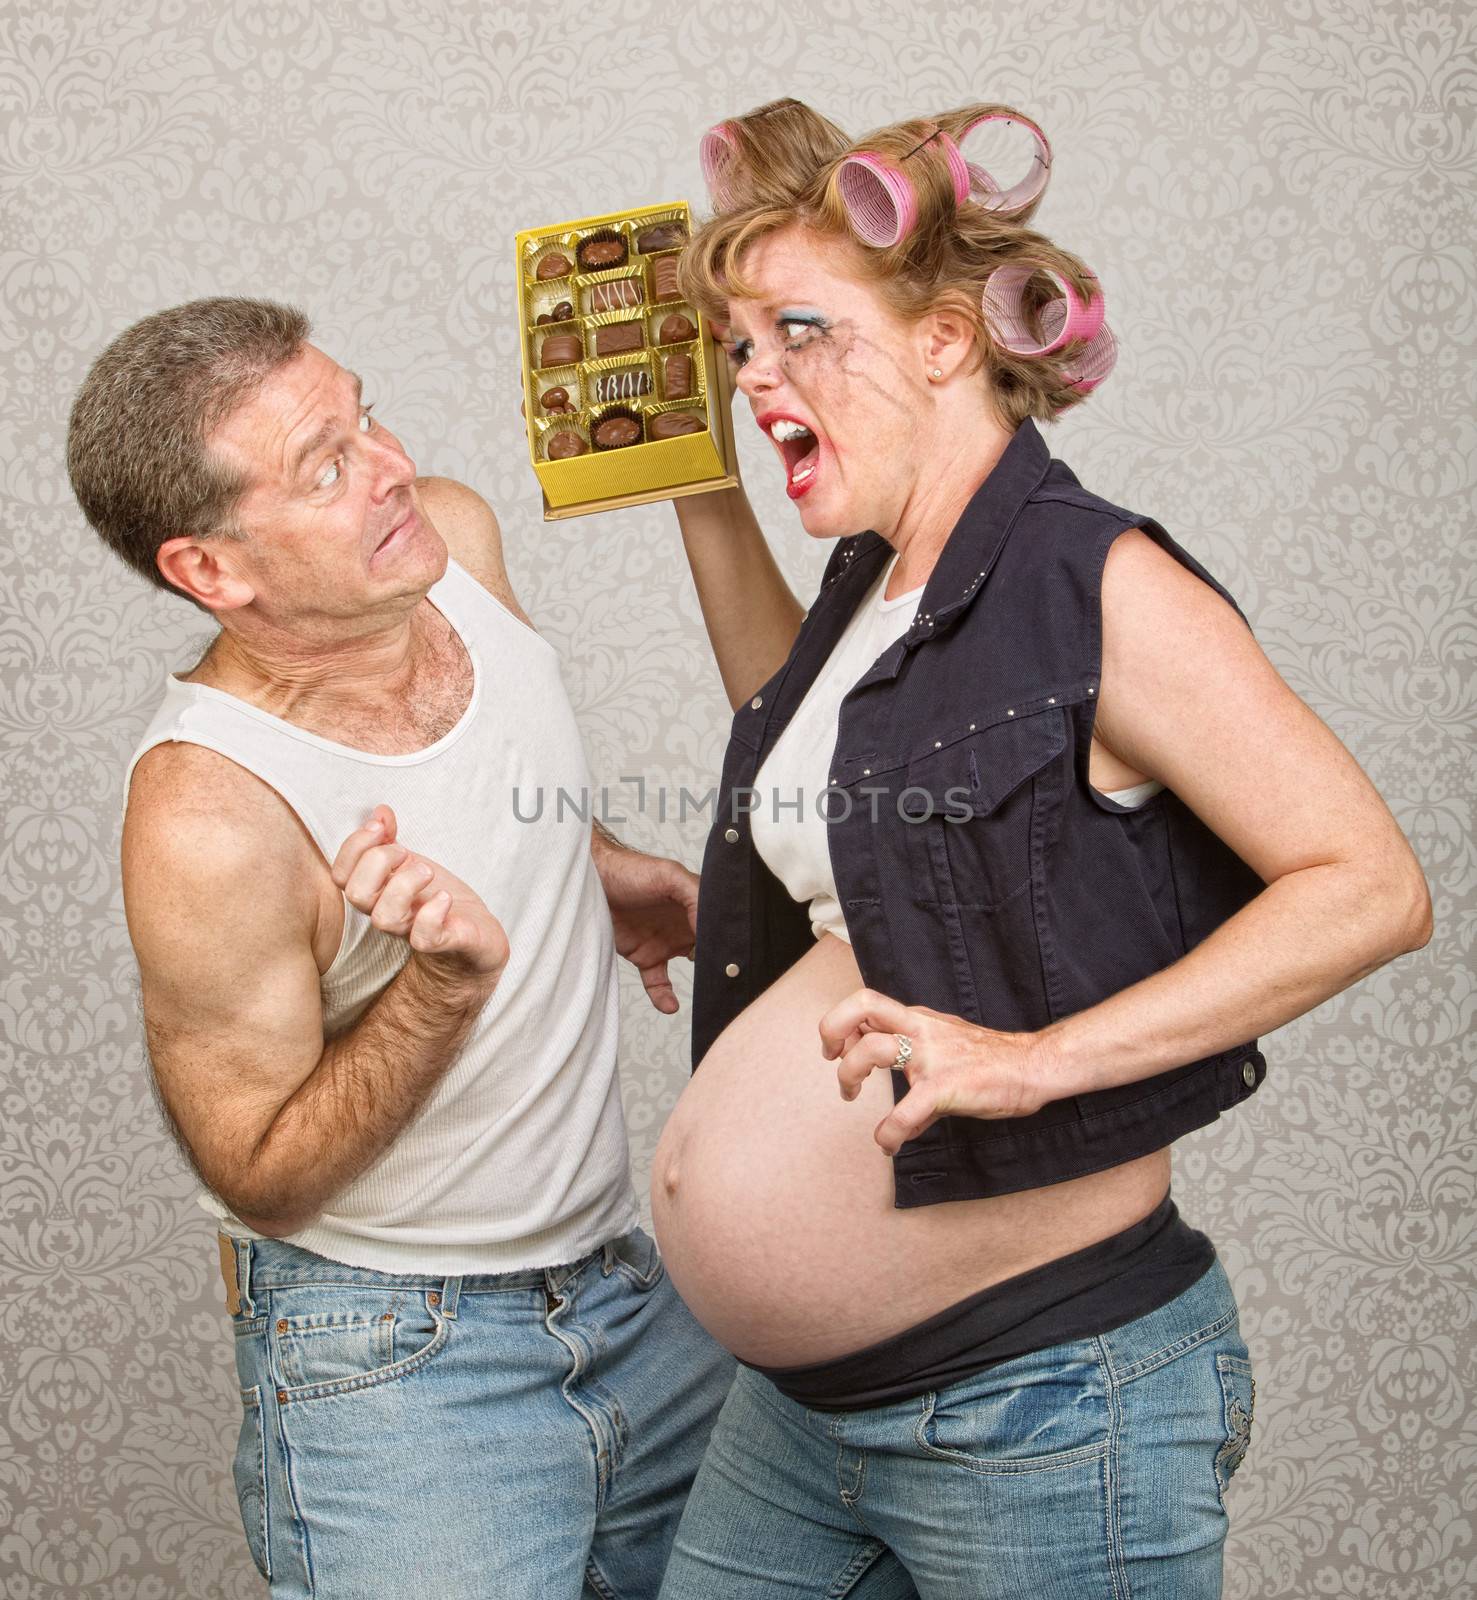 Angry Pregant WomanThrowing Candy by Creatista